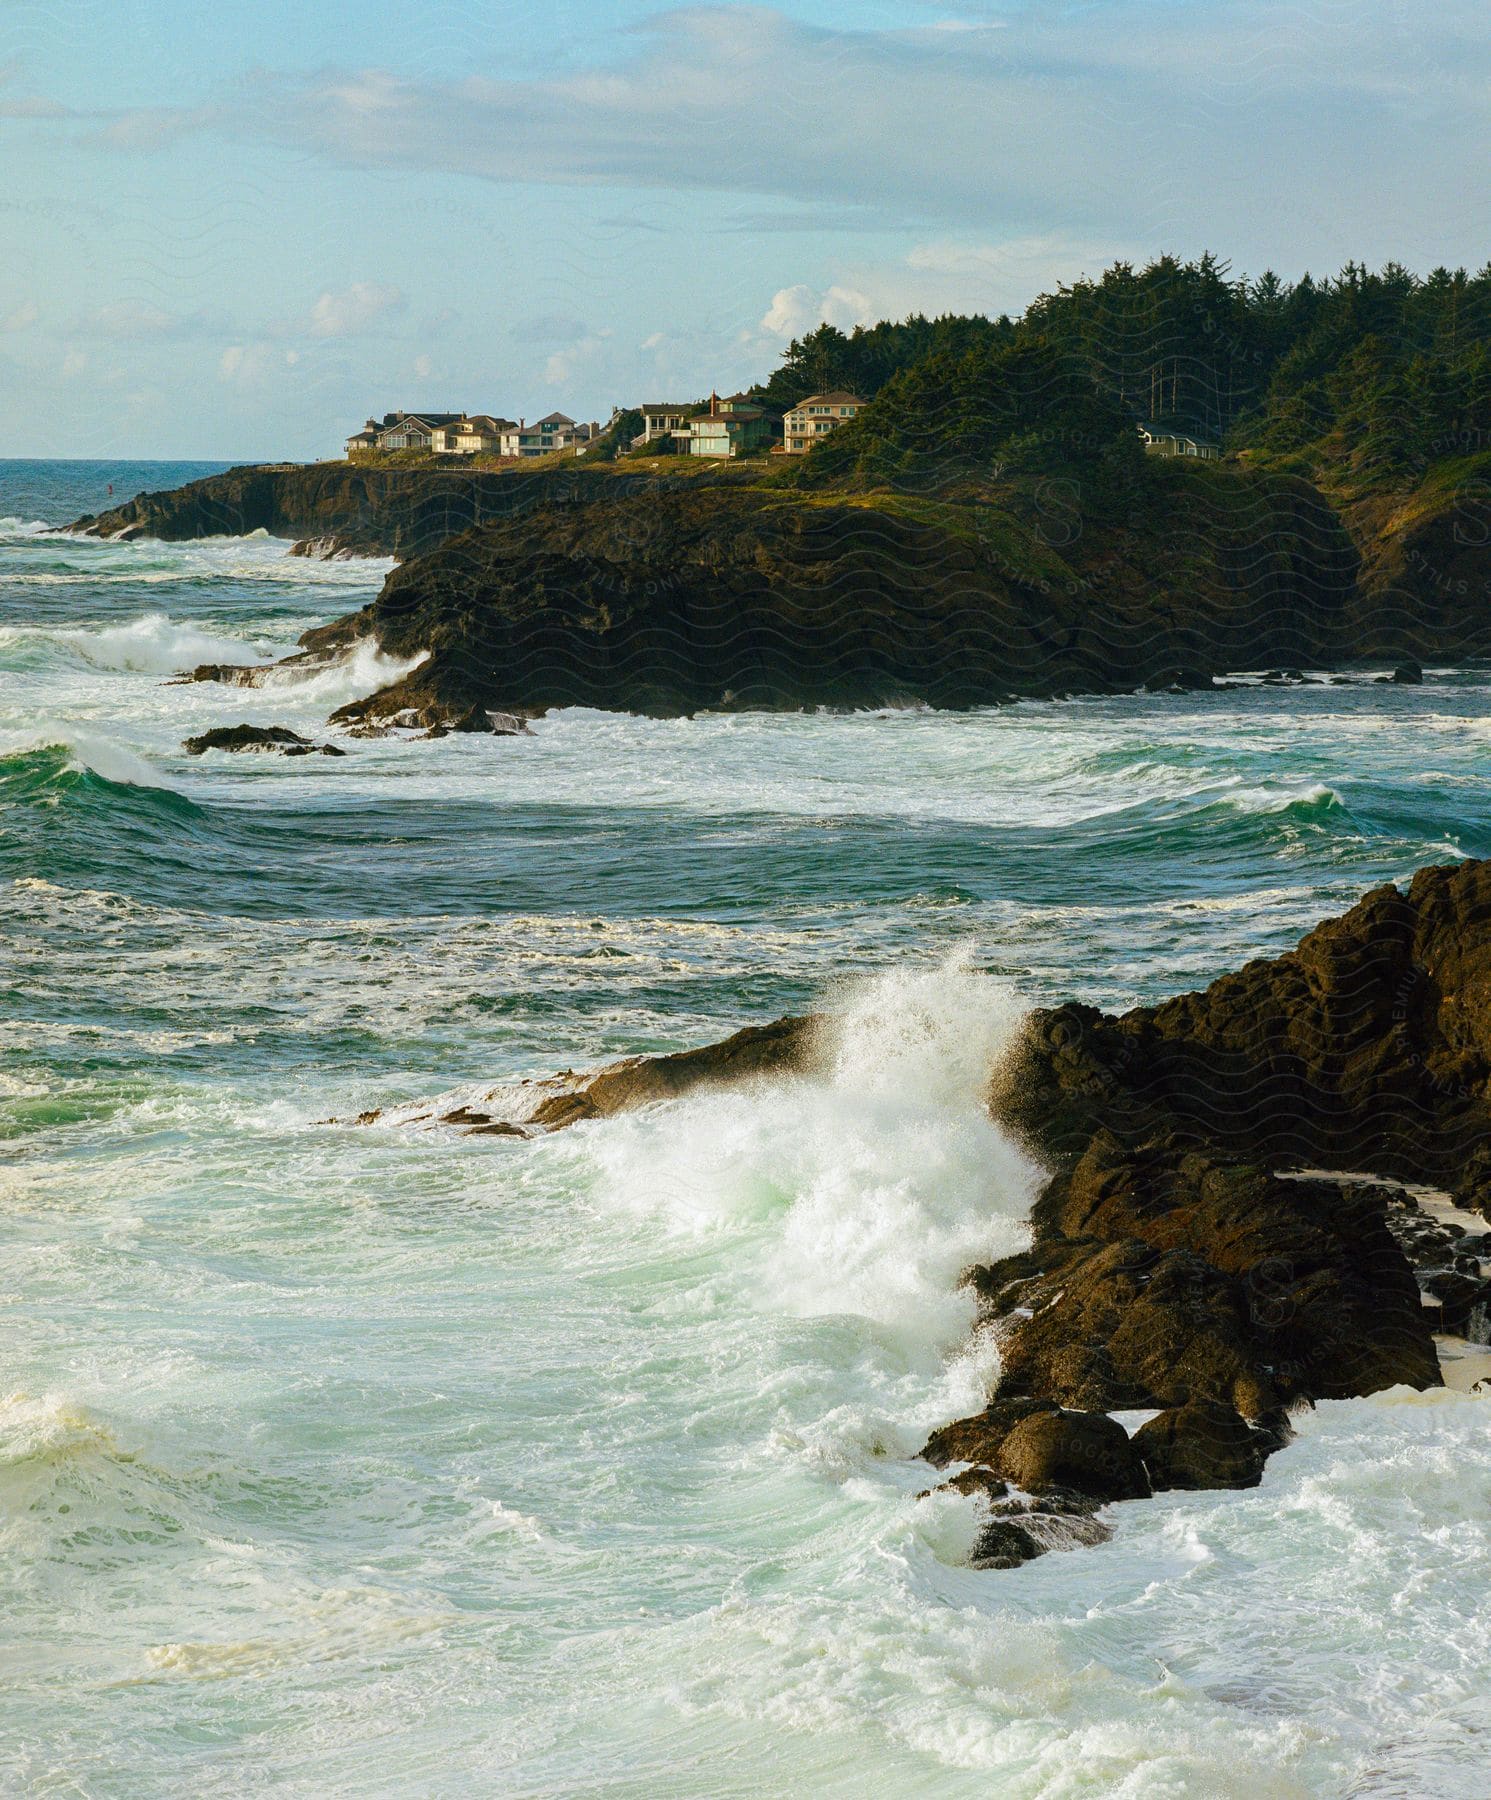 The powerful waves crash against the rocky shoreline with a coastal town, sending spray high into the air.